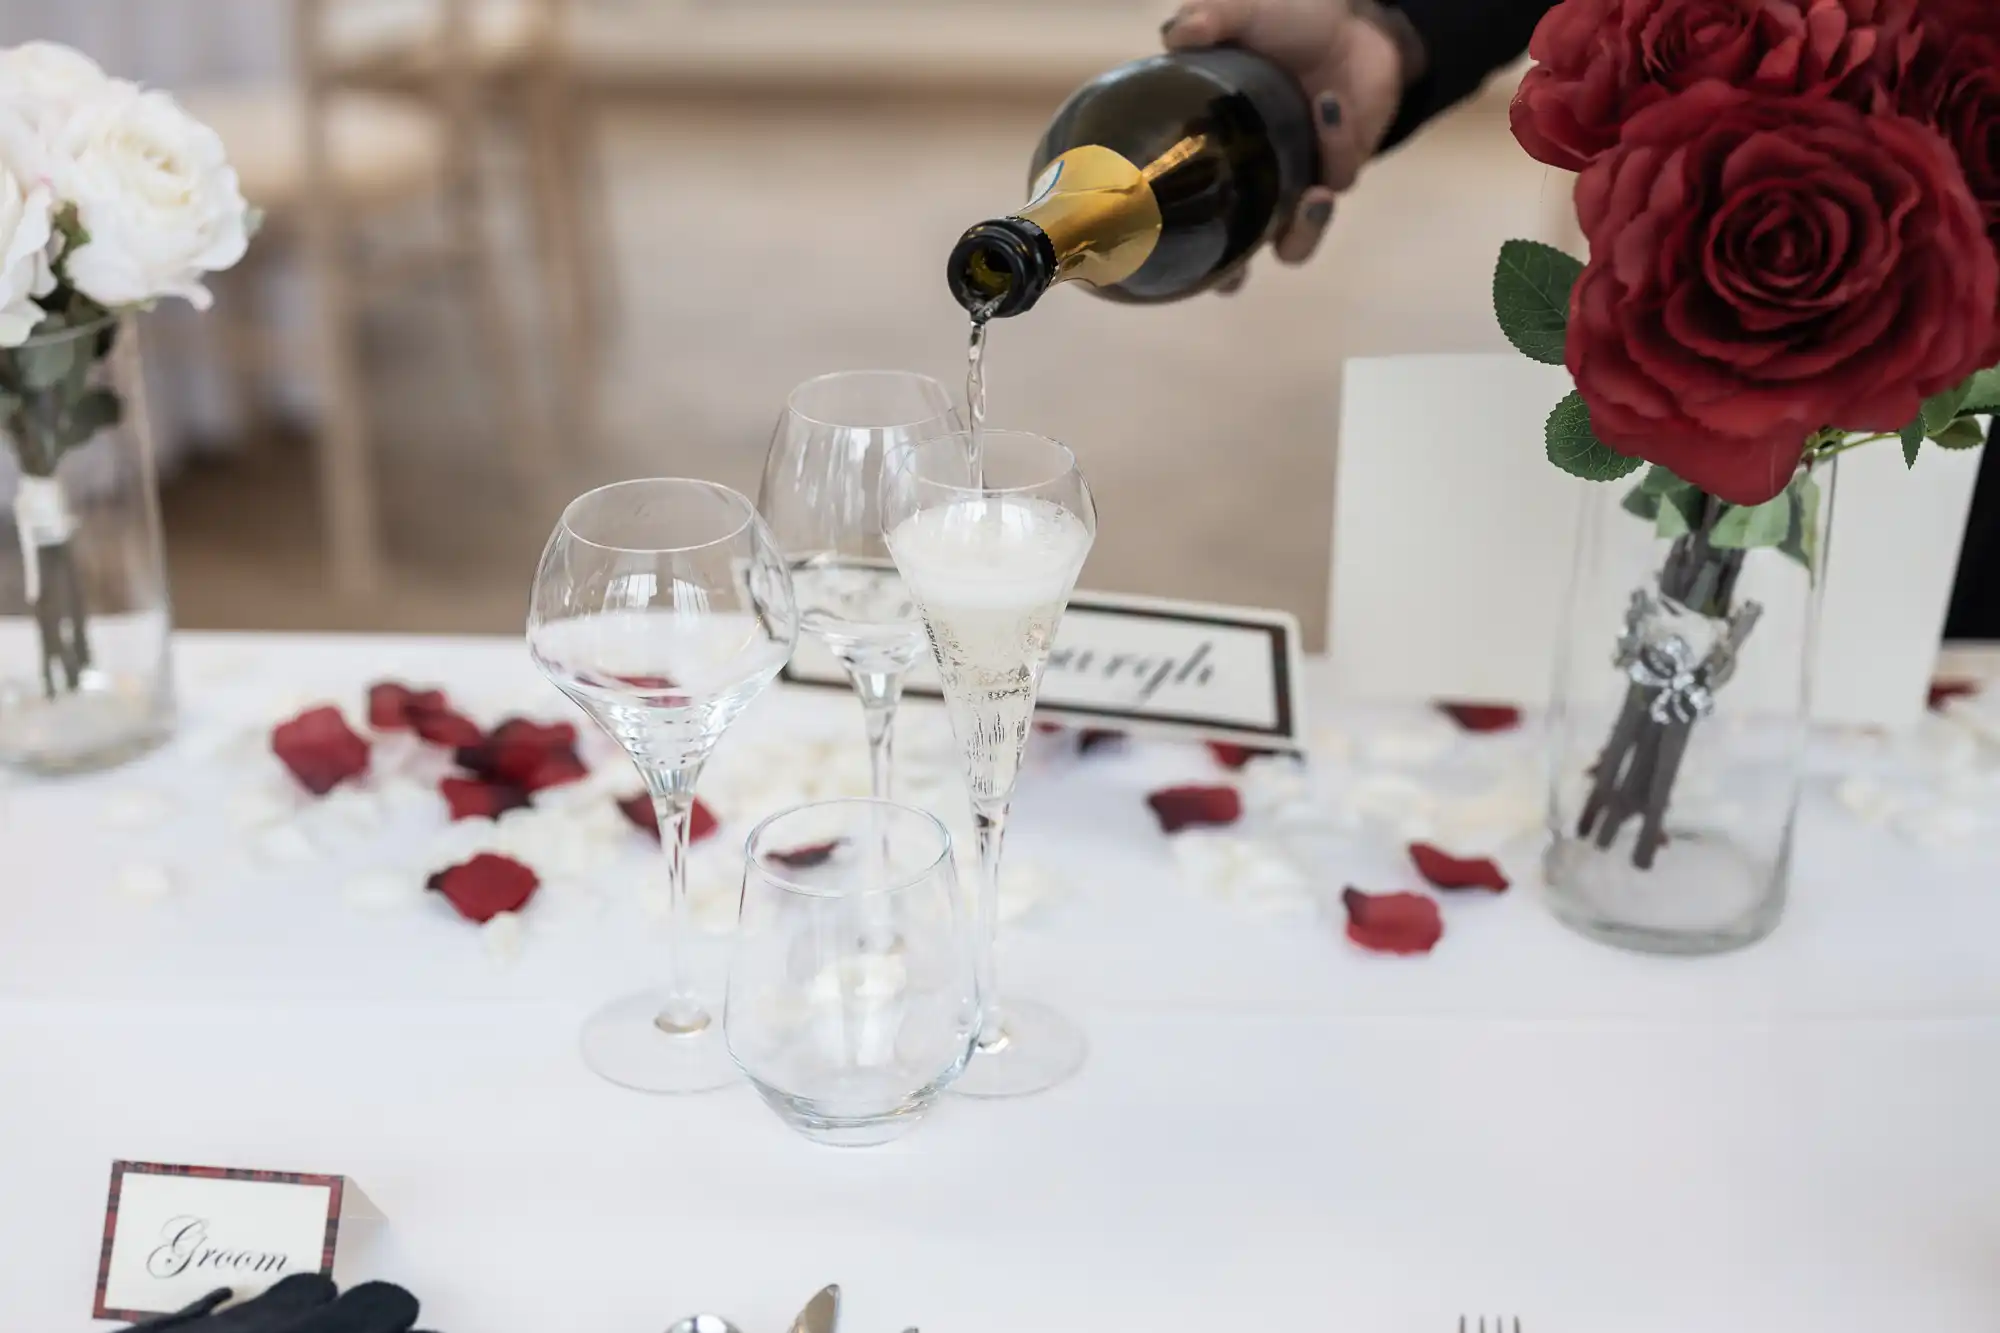 Hand pouring champagne into flute on elegantly decorated table with red, white roses, and scattered rose petals.